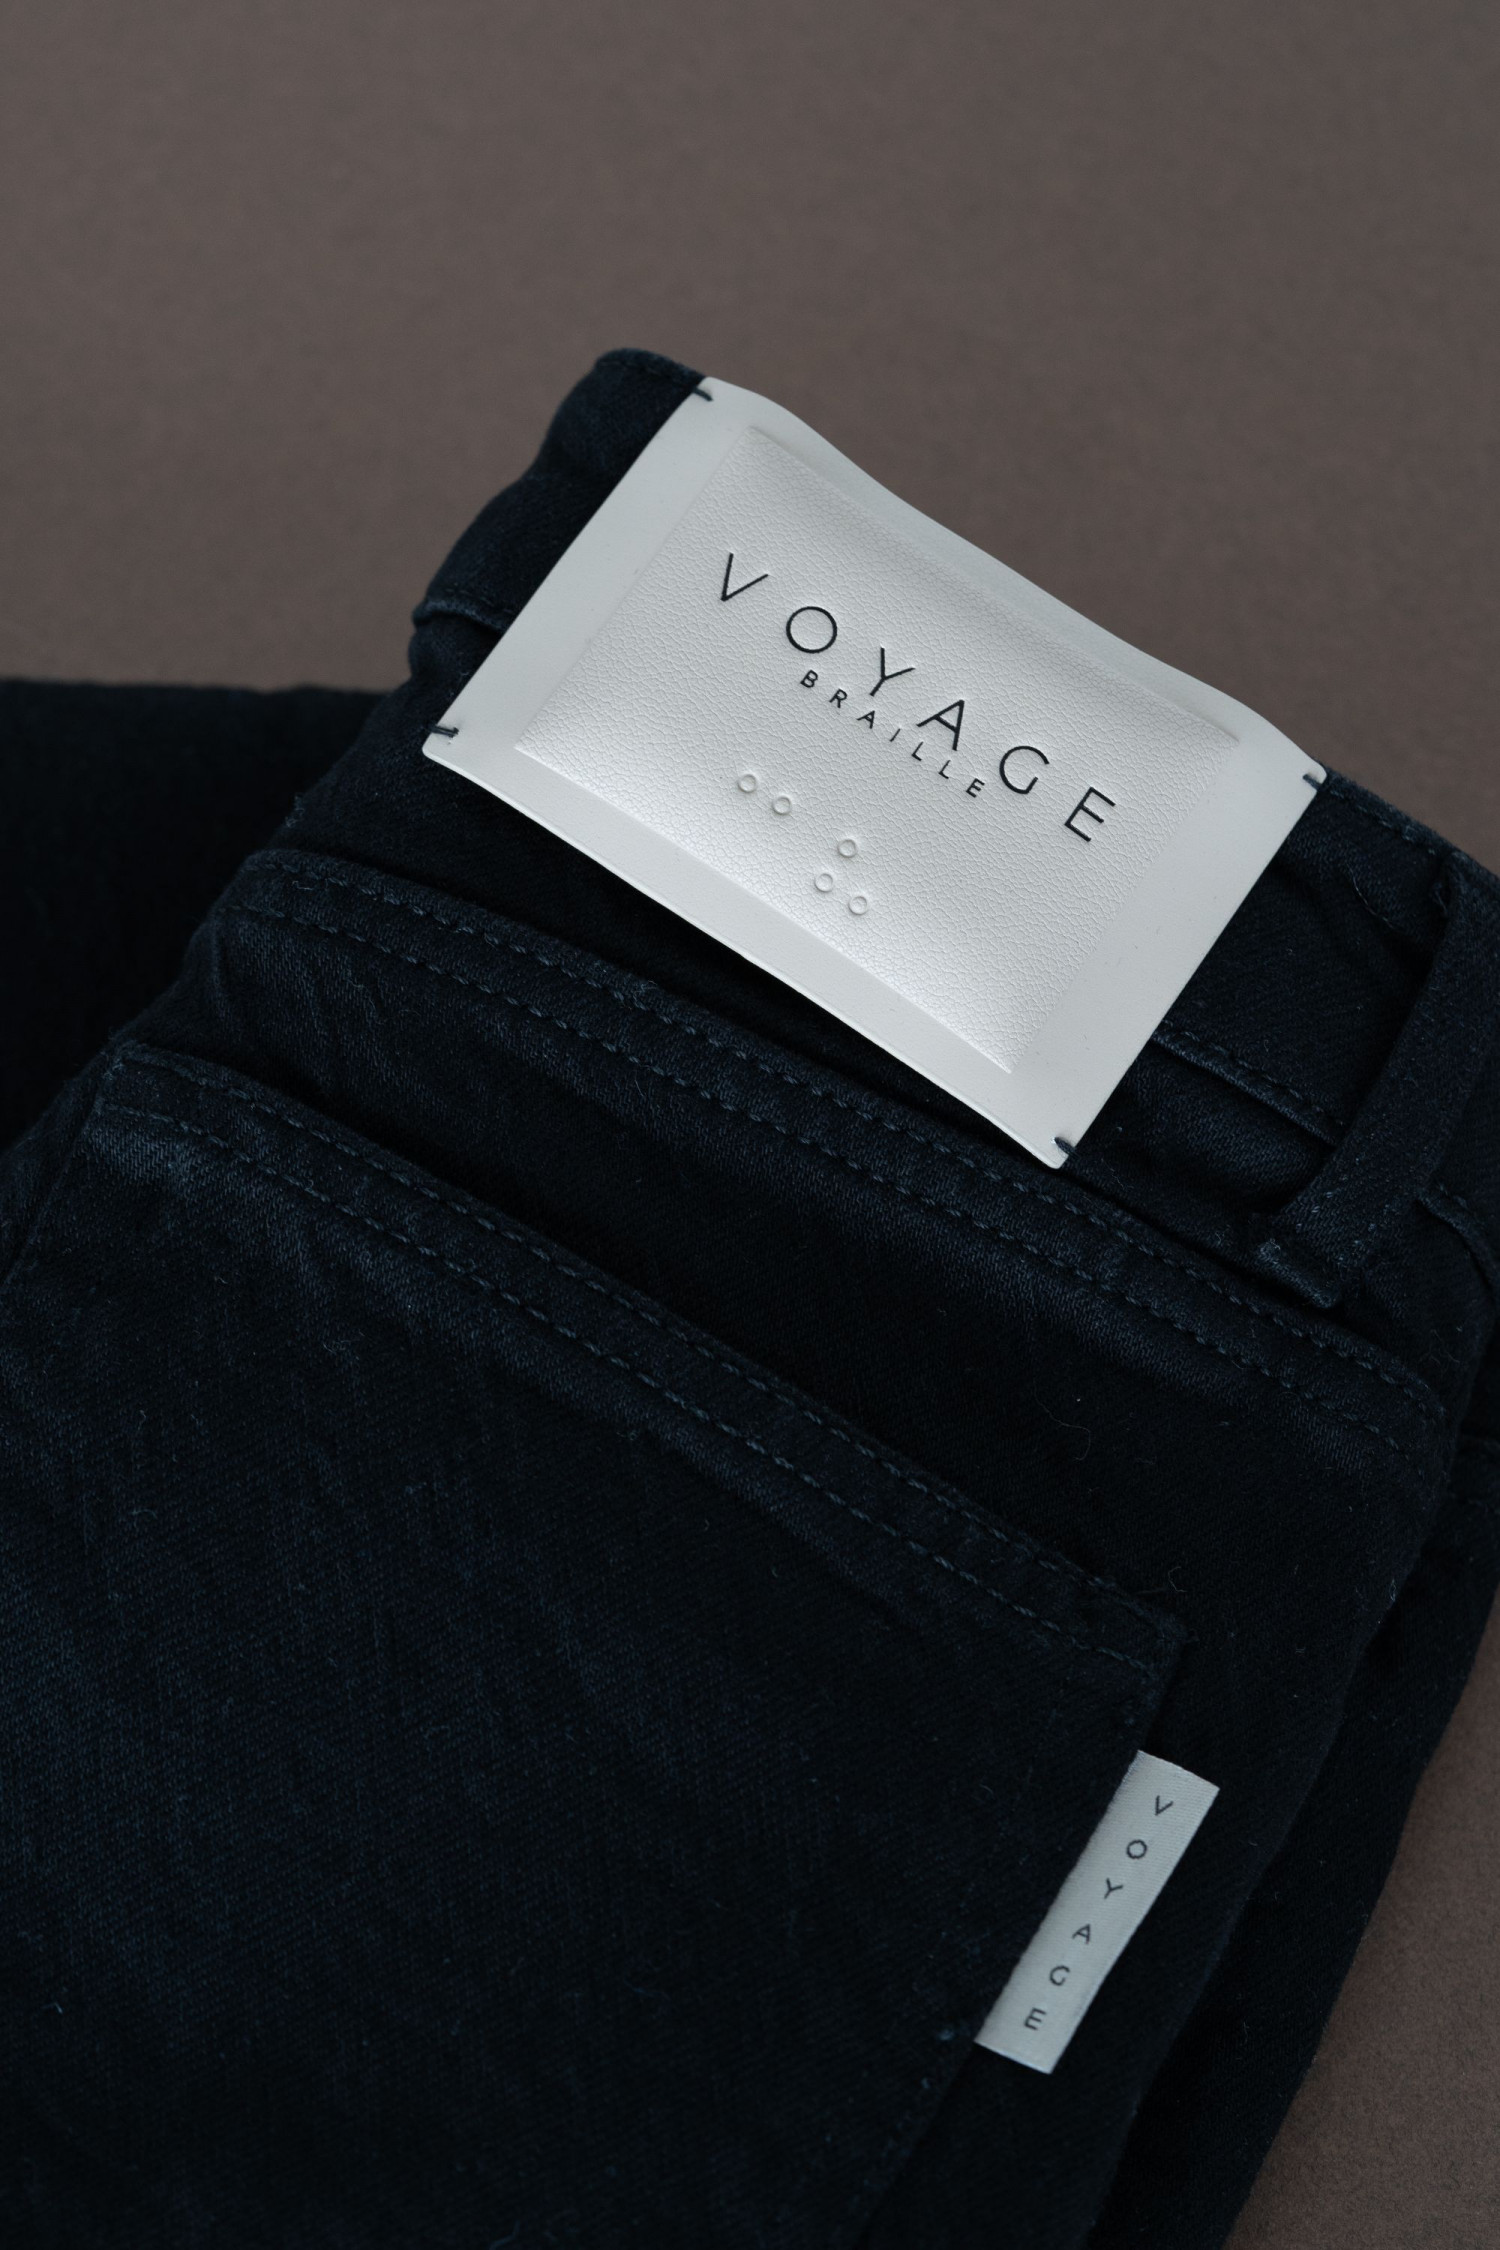 VOYAGE Collection